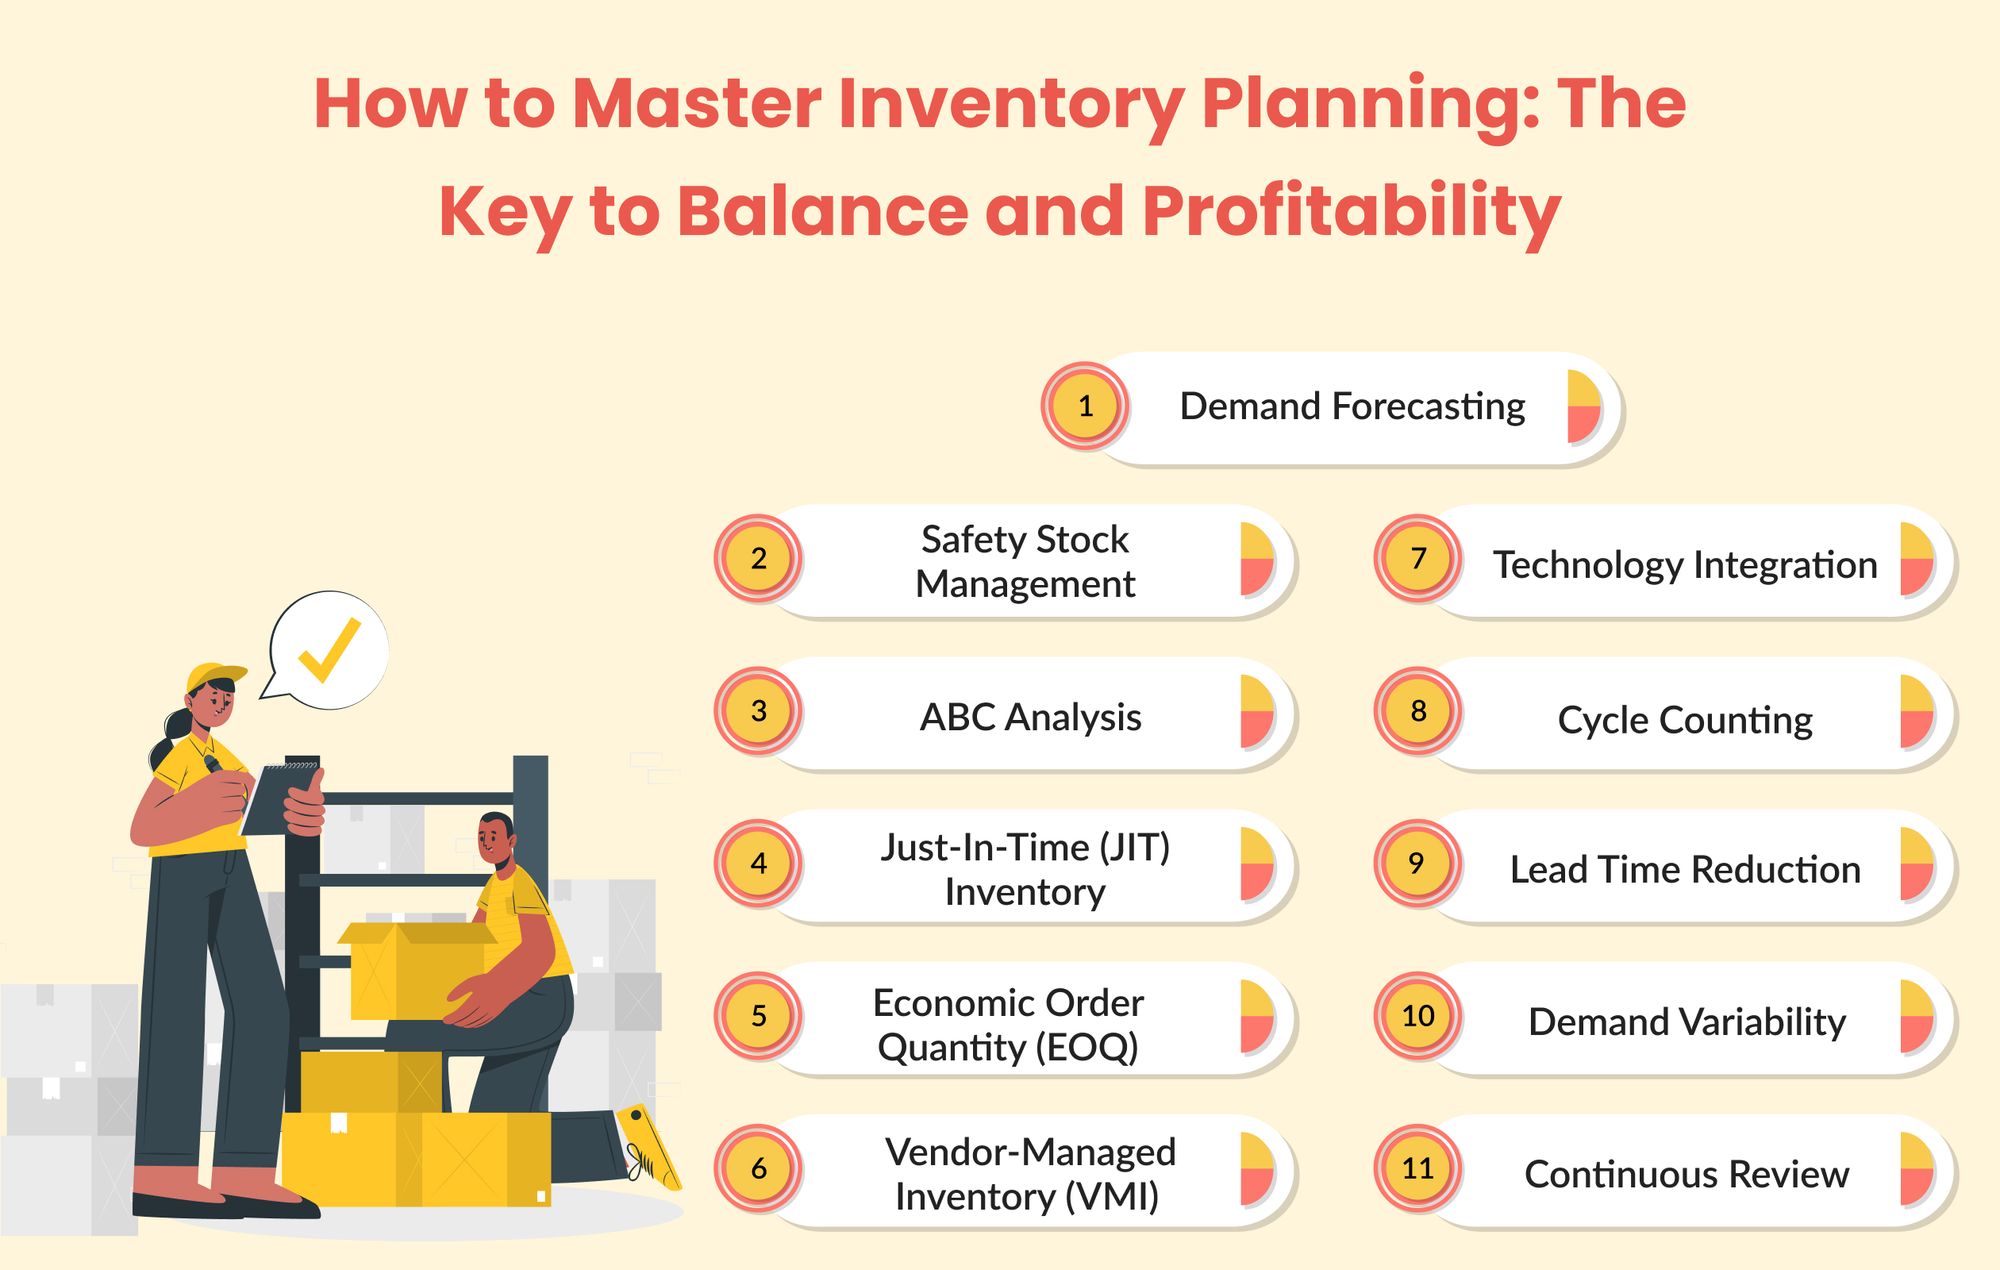 How to Master Inventory Planning: The Key to Balance and Profitability